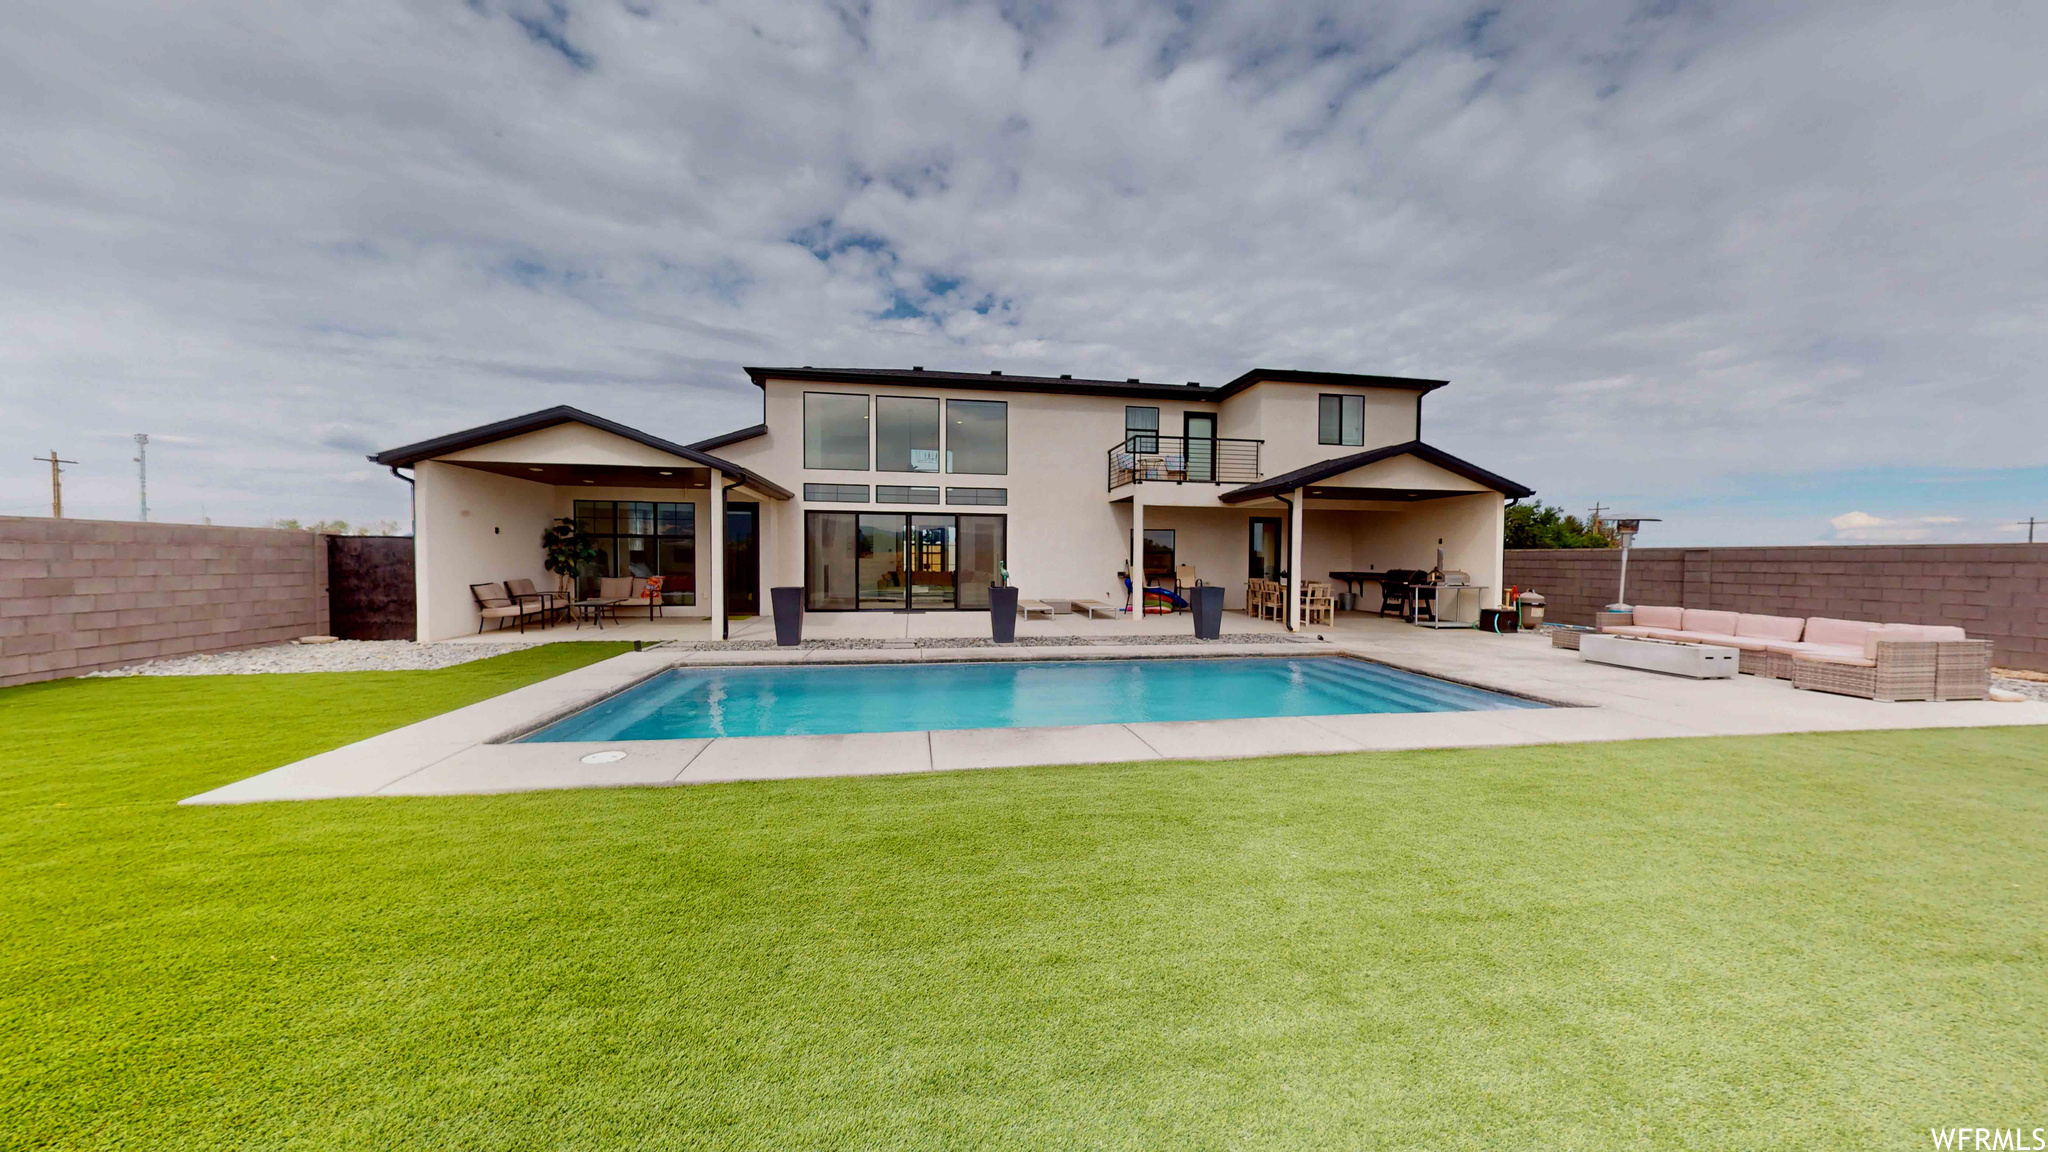 View of pool with a lawn, a patio, and an outdoor living space